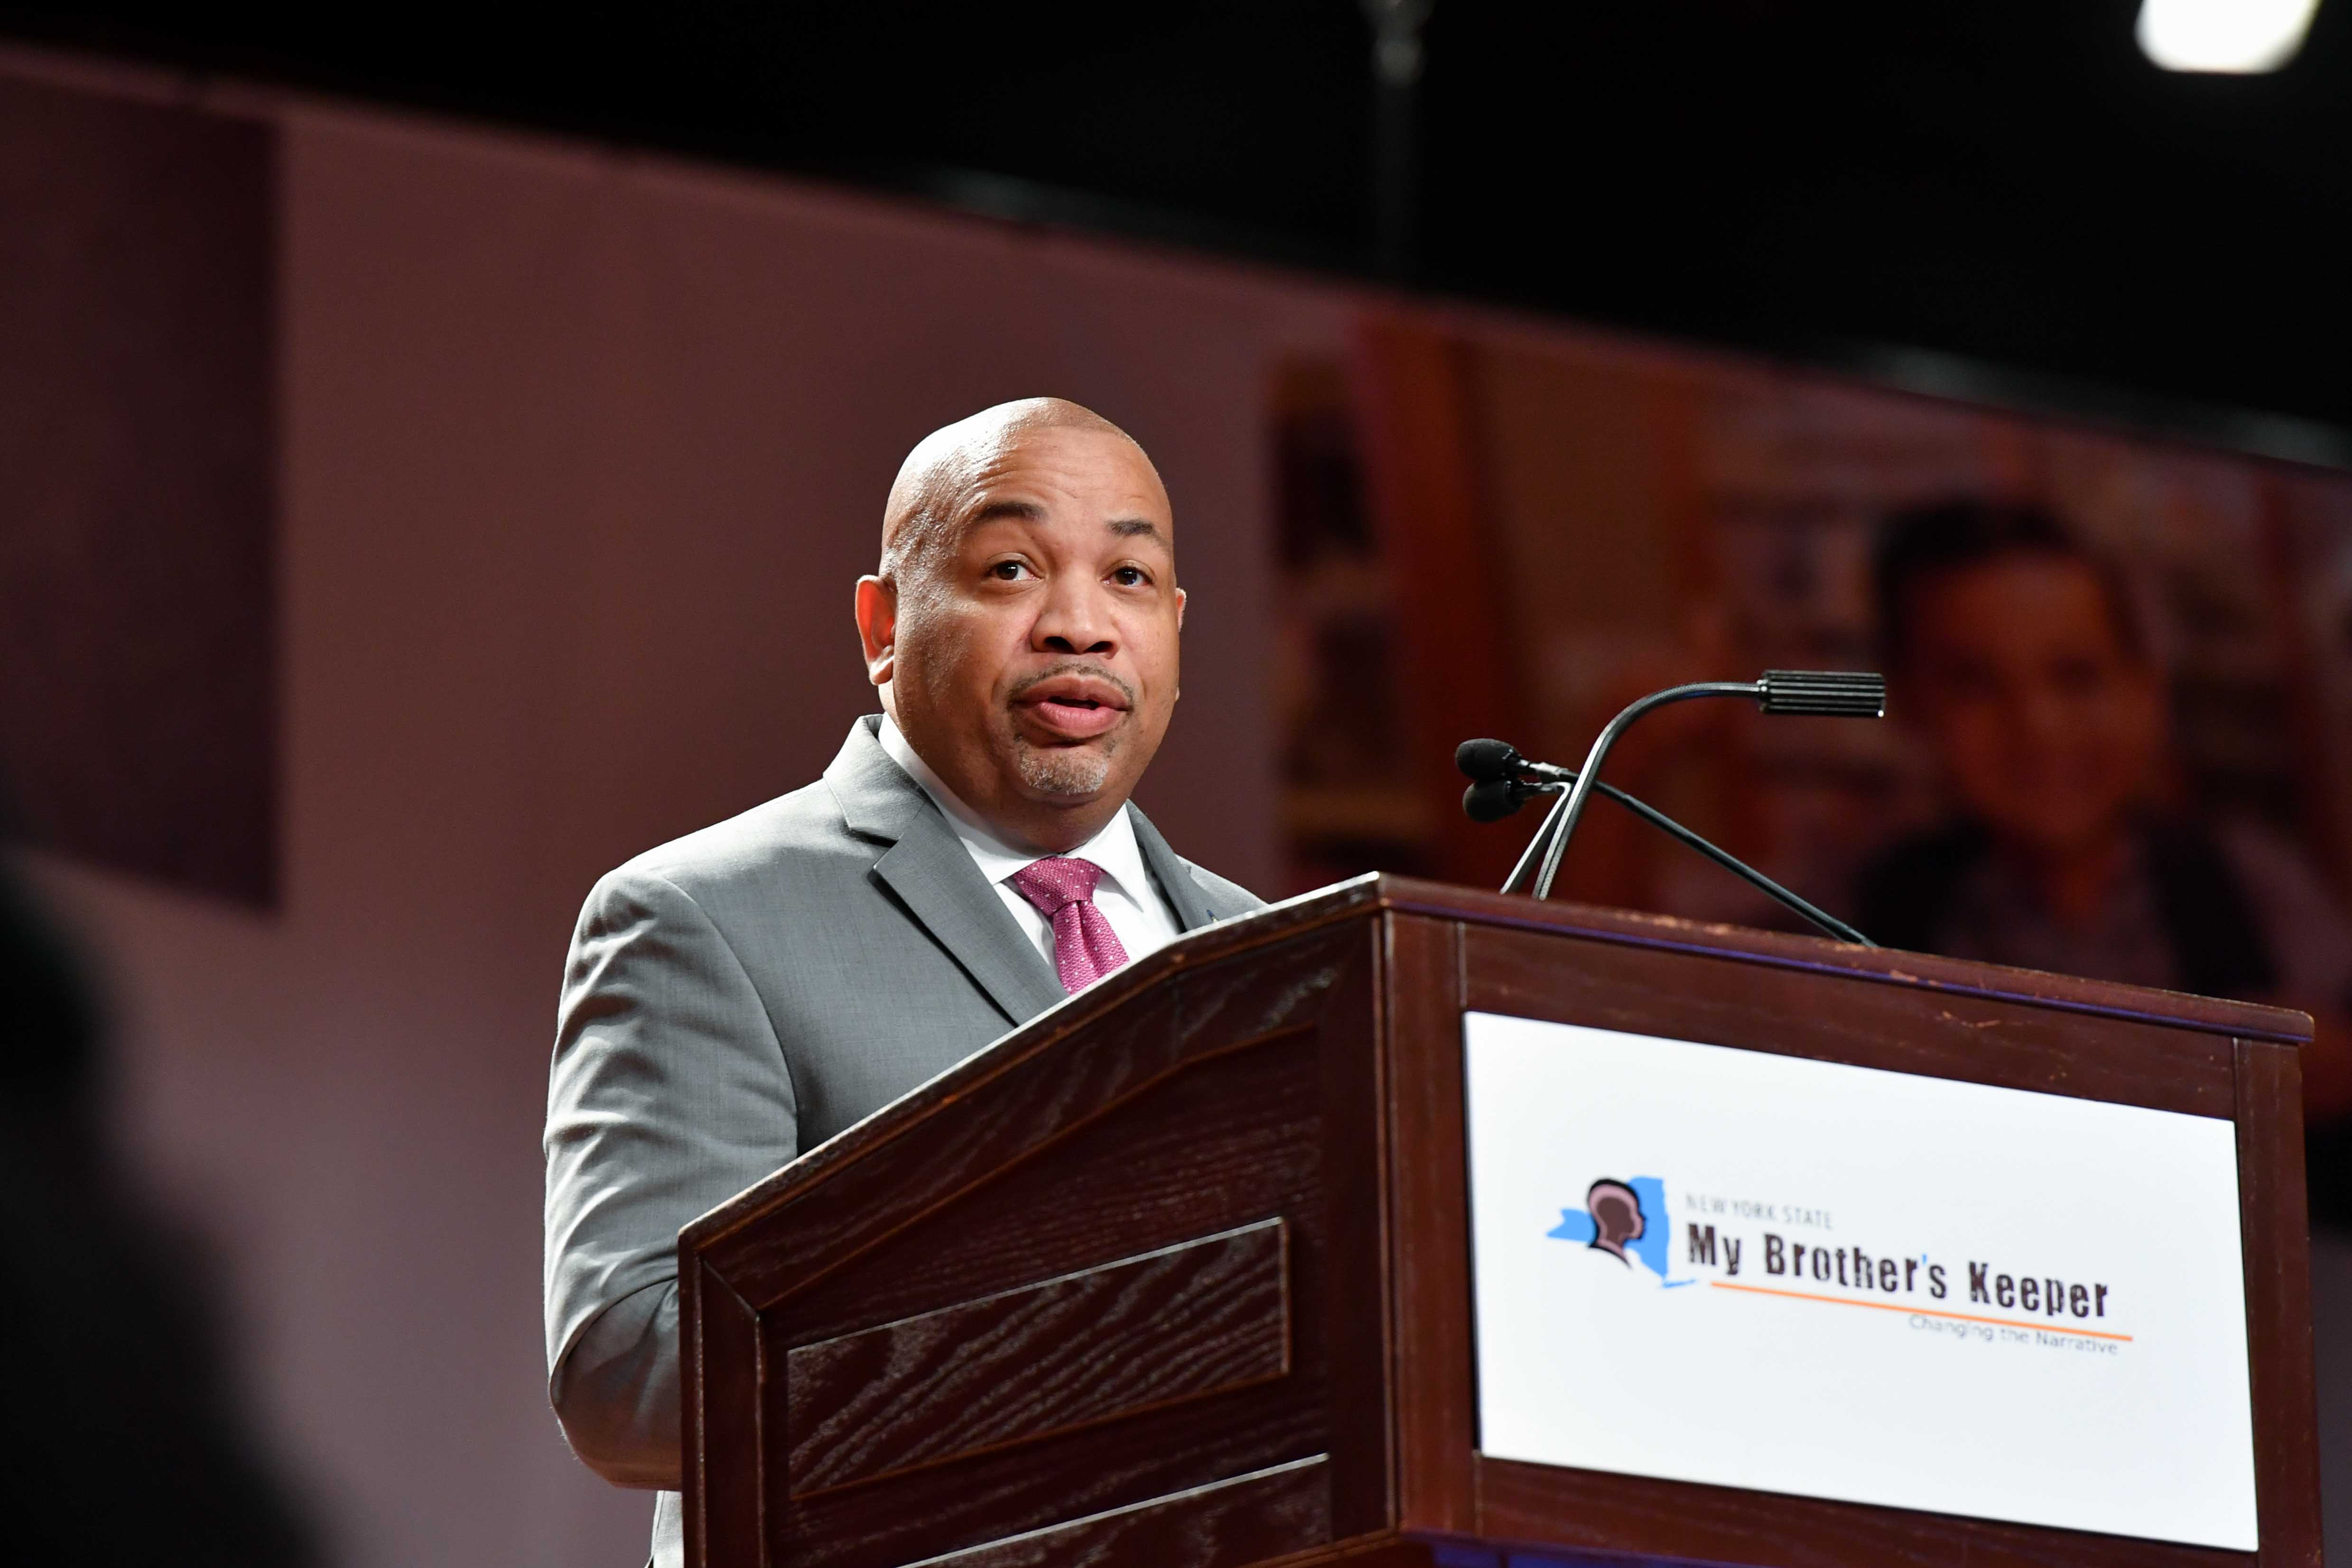 Speaker Heastie at the My Brother’s Keeper Symposium